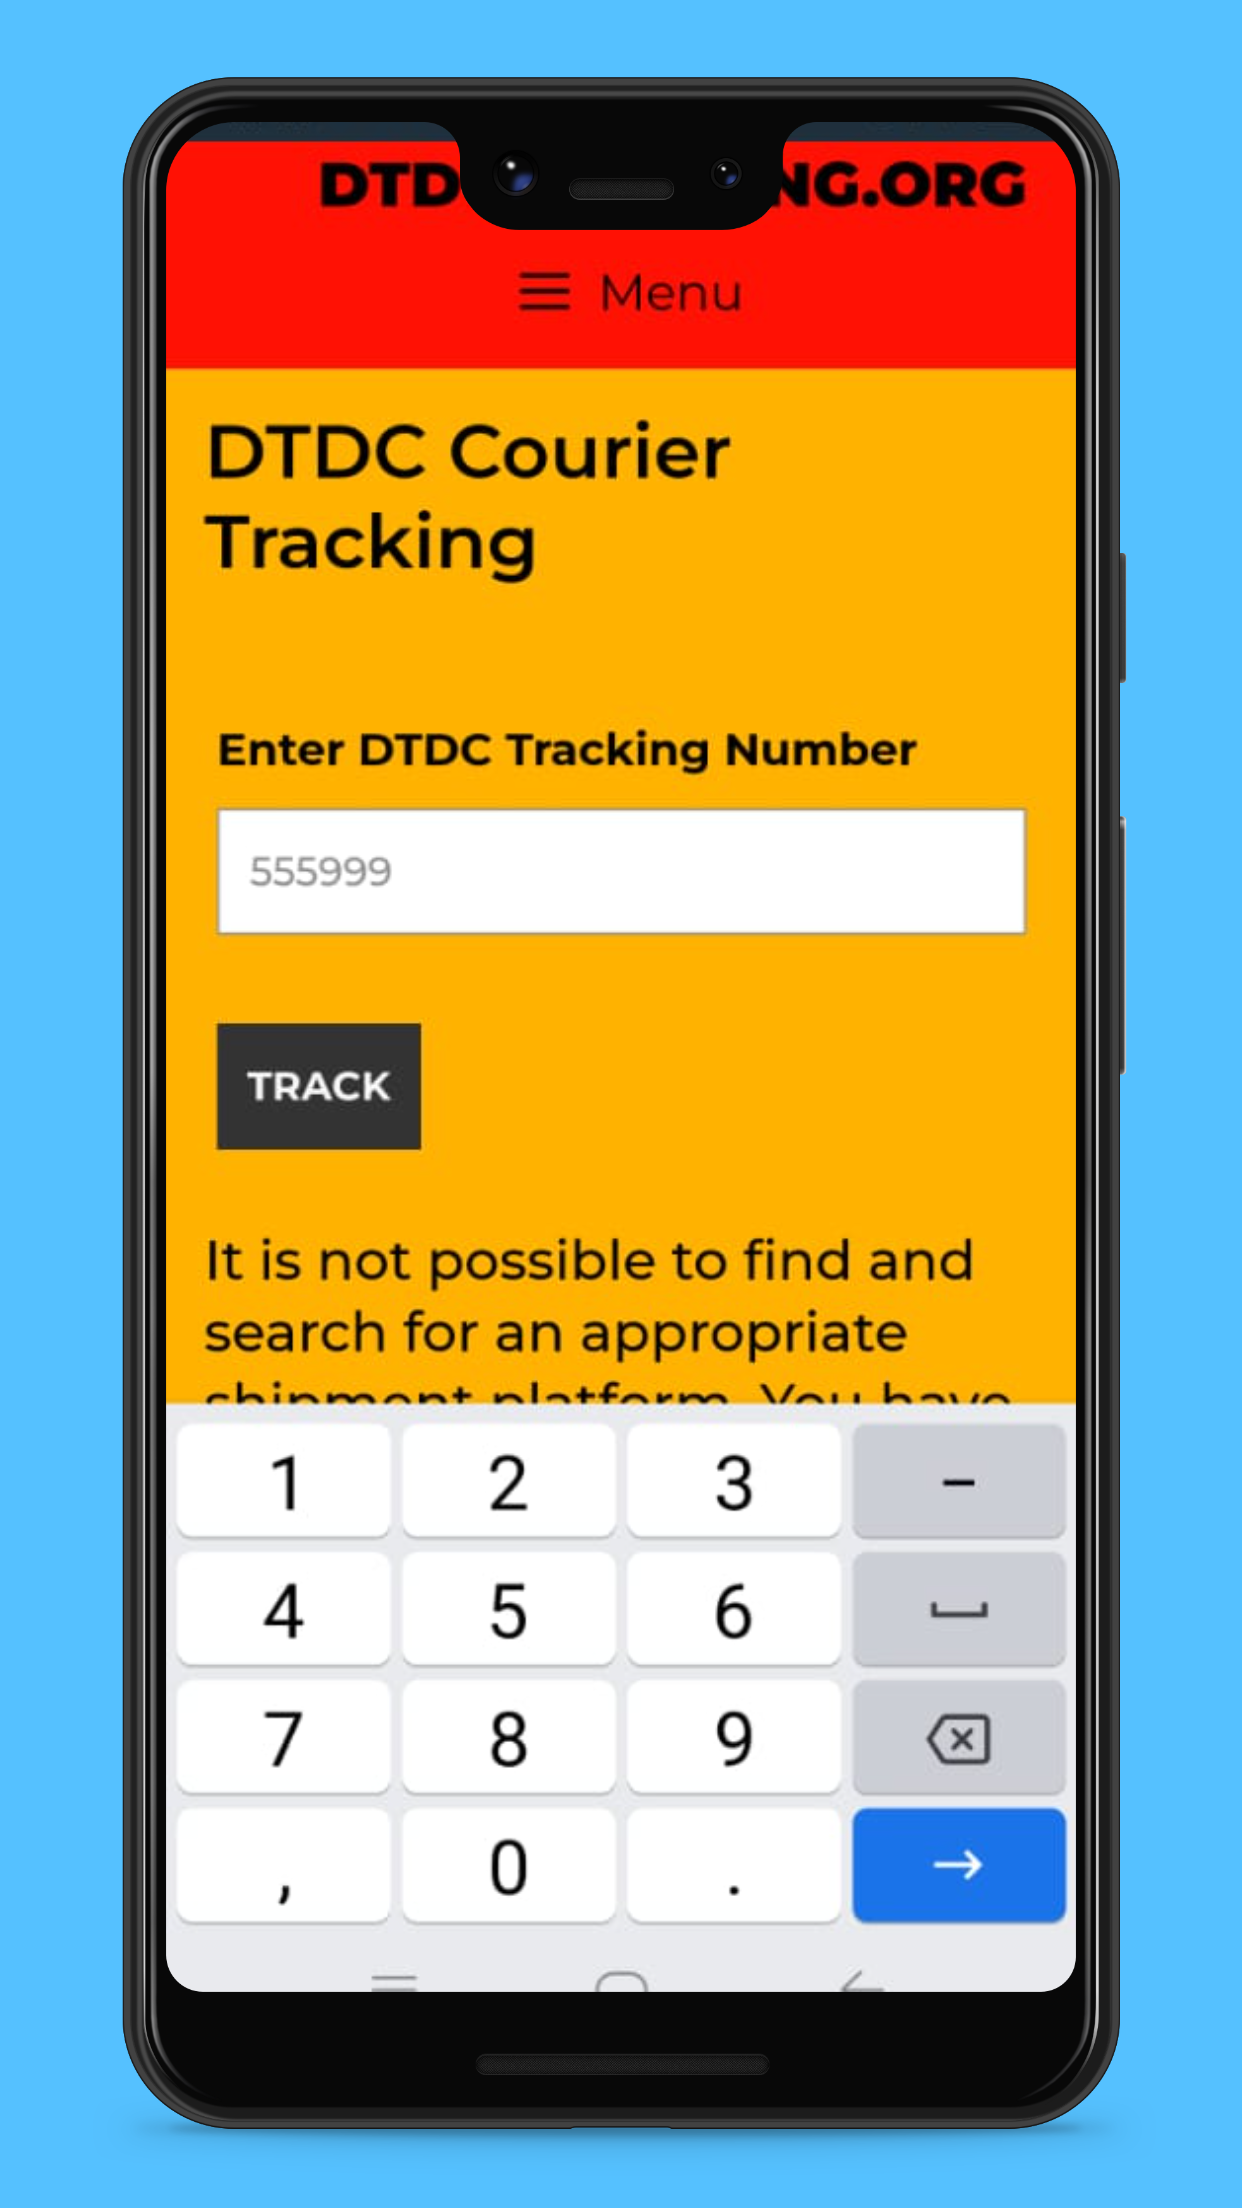 DTDC Courier Tracking